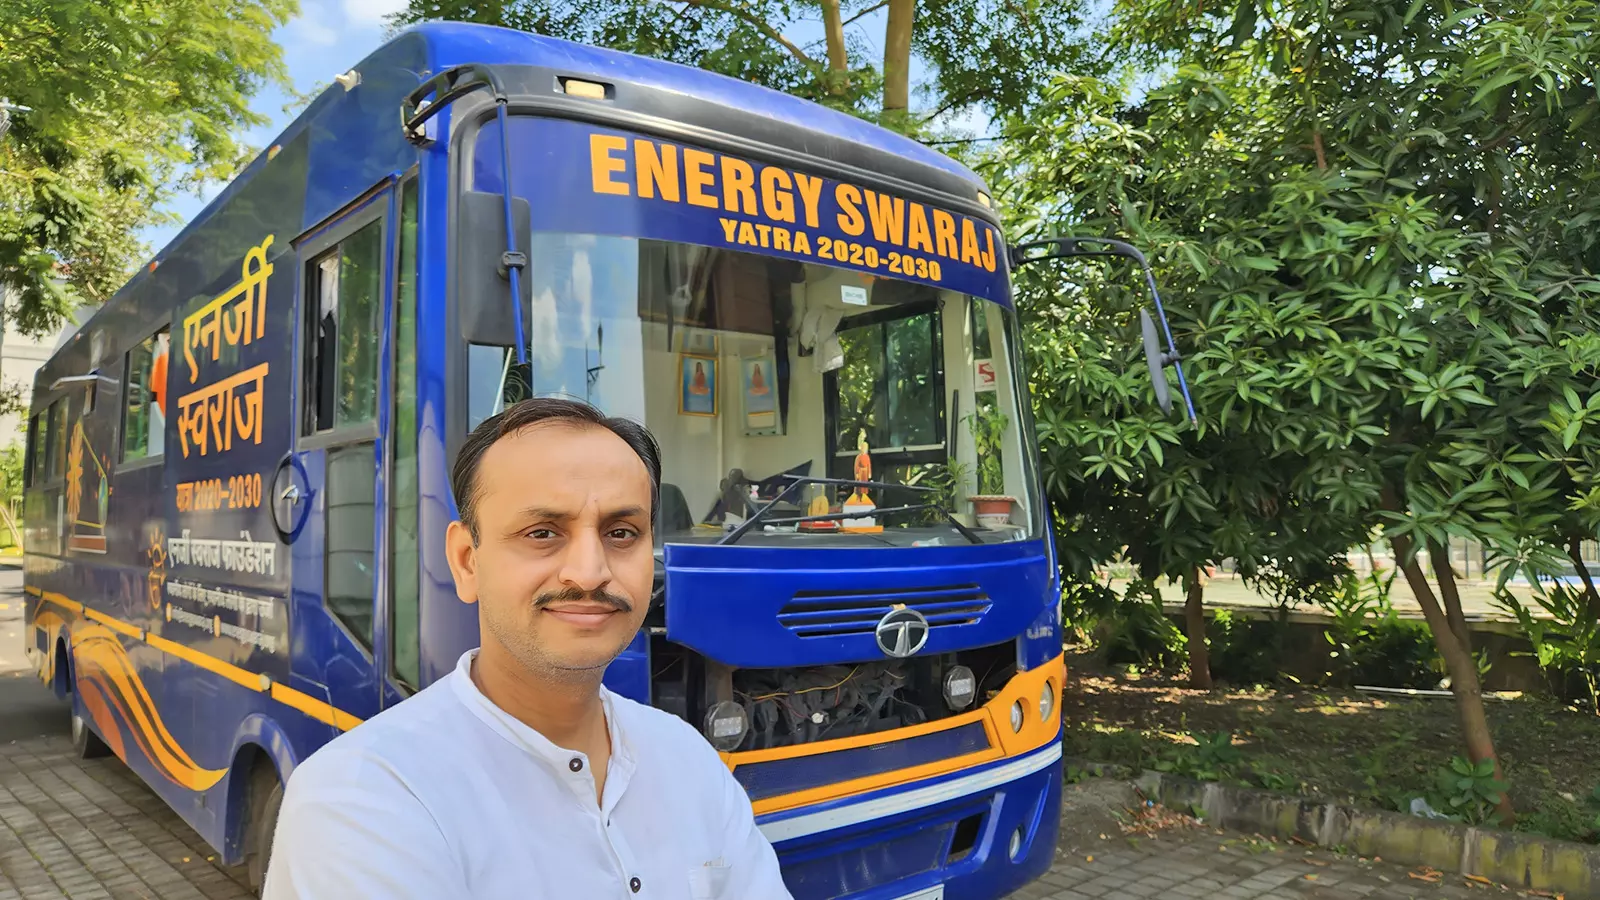 Chetan Solanki’s 11-year-long yatra aims to bring energy literacy to over 100 crore and encourage over one crore families to switch completely to solar energy.